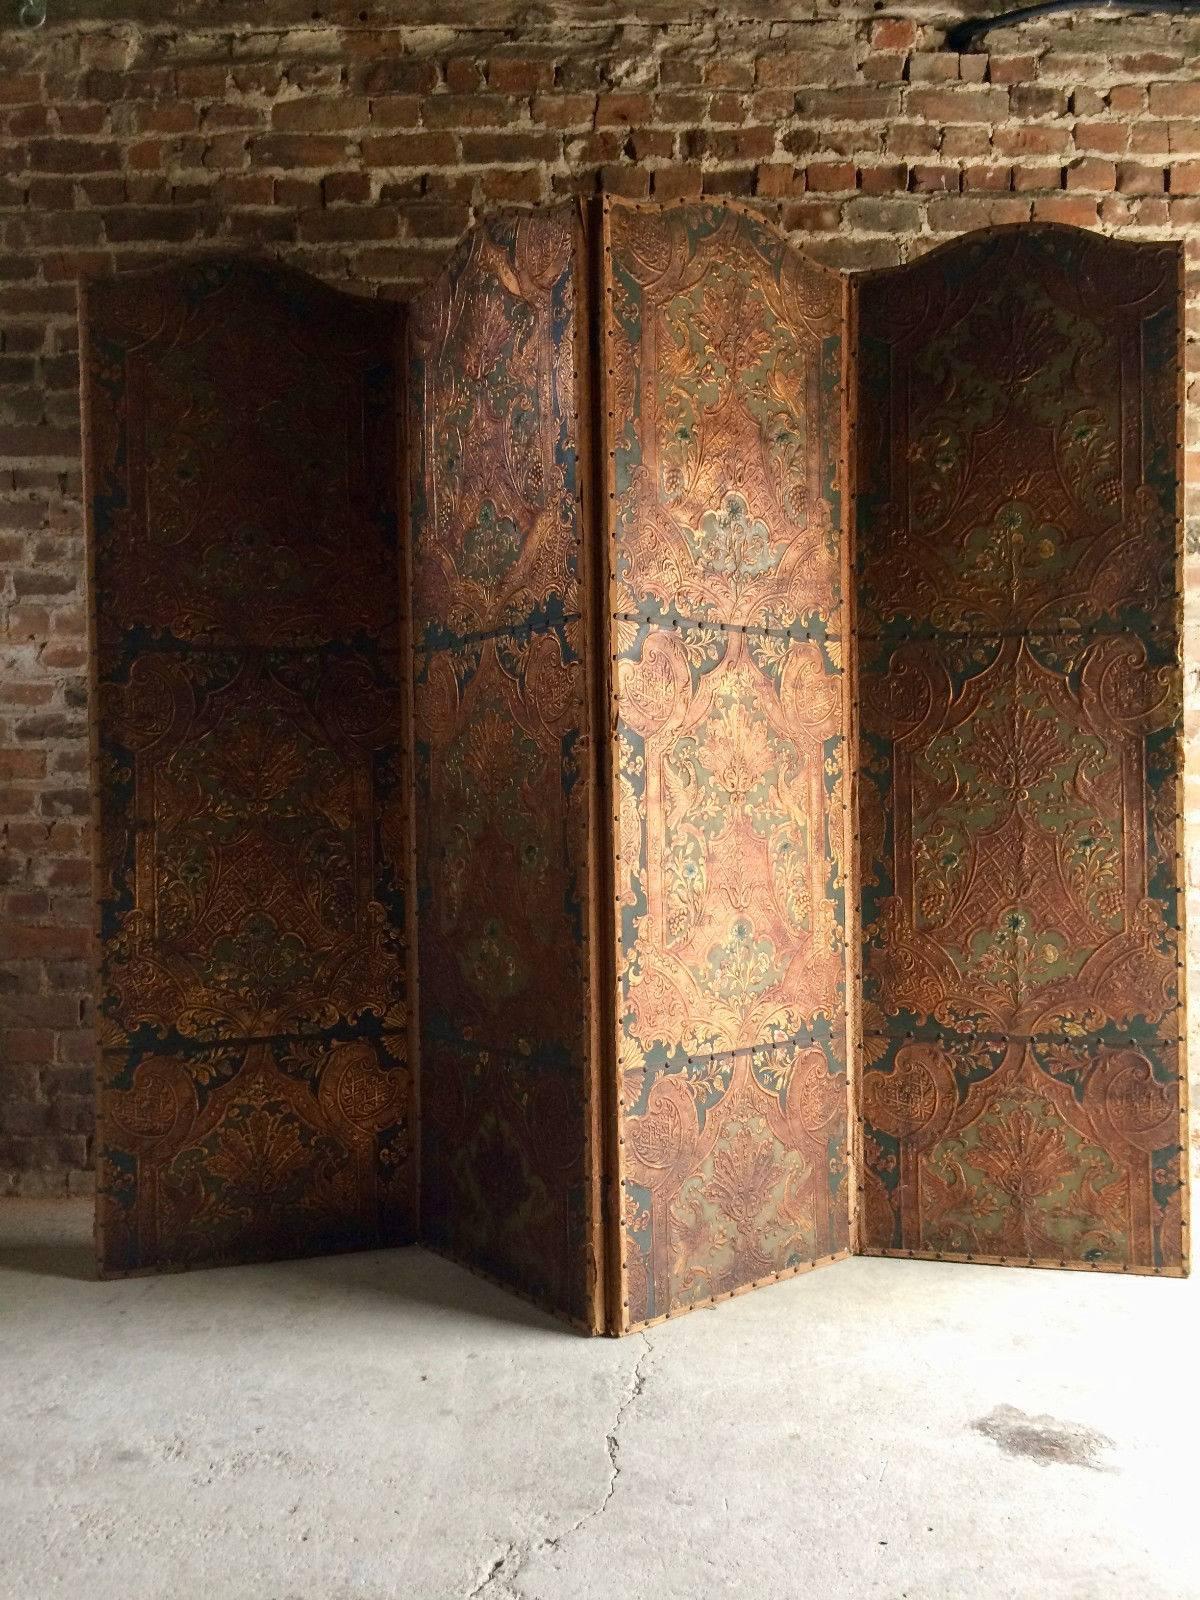 A stunning antique 19th century continental heavily embossed leather four fold dressing screen or room divider, the screen with four folding leather panels all classically embossed with shades of reds, greens, and golds, the reverse the with